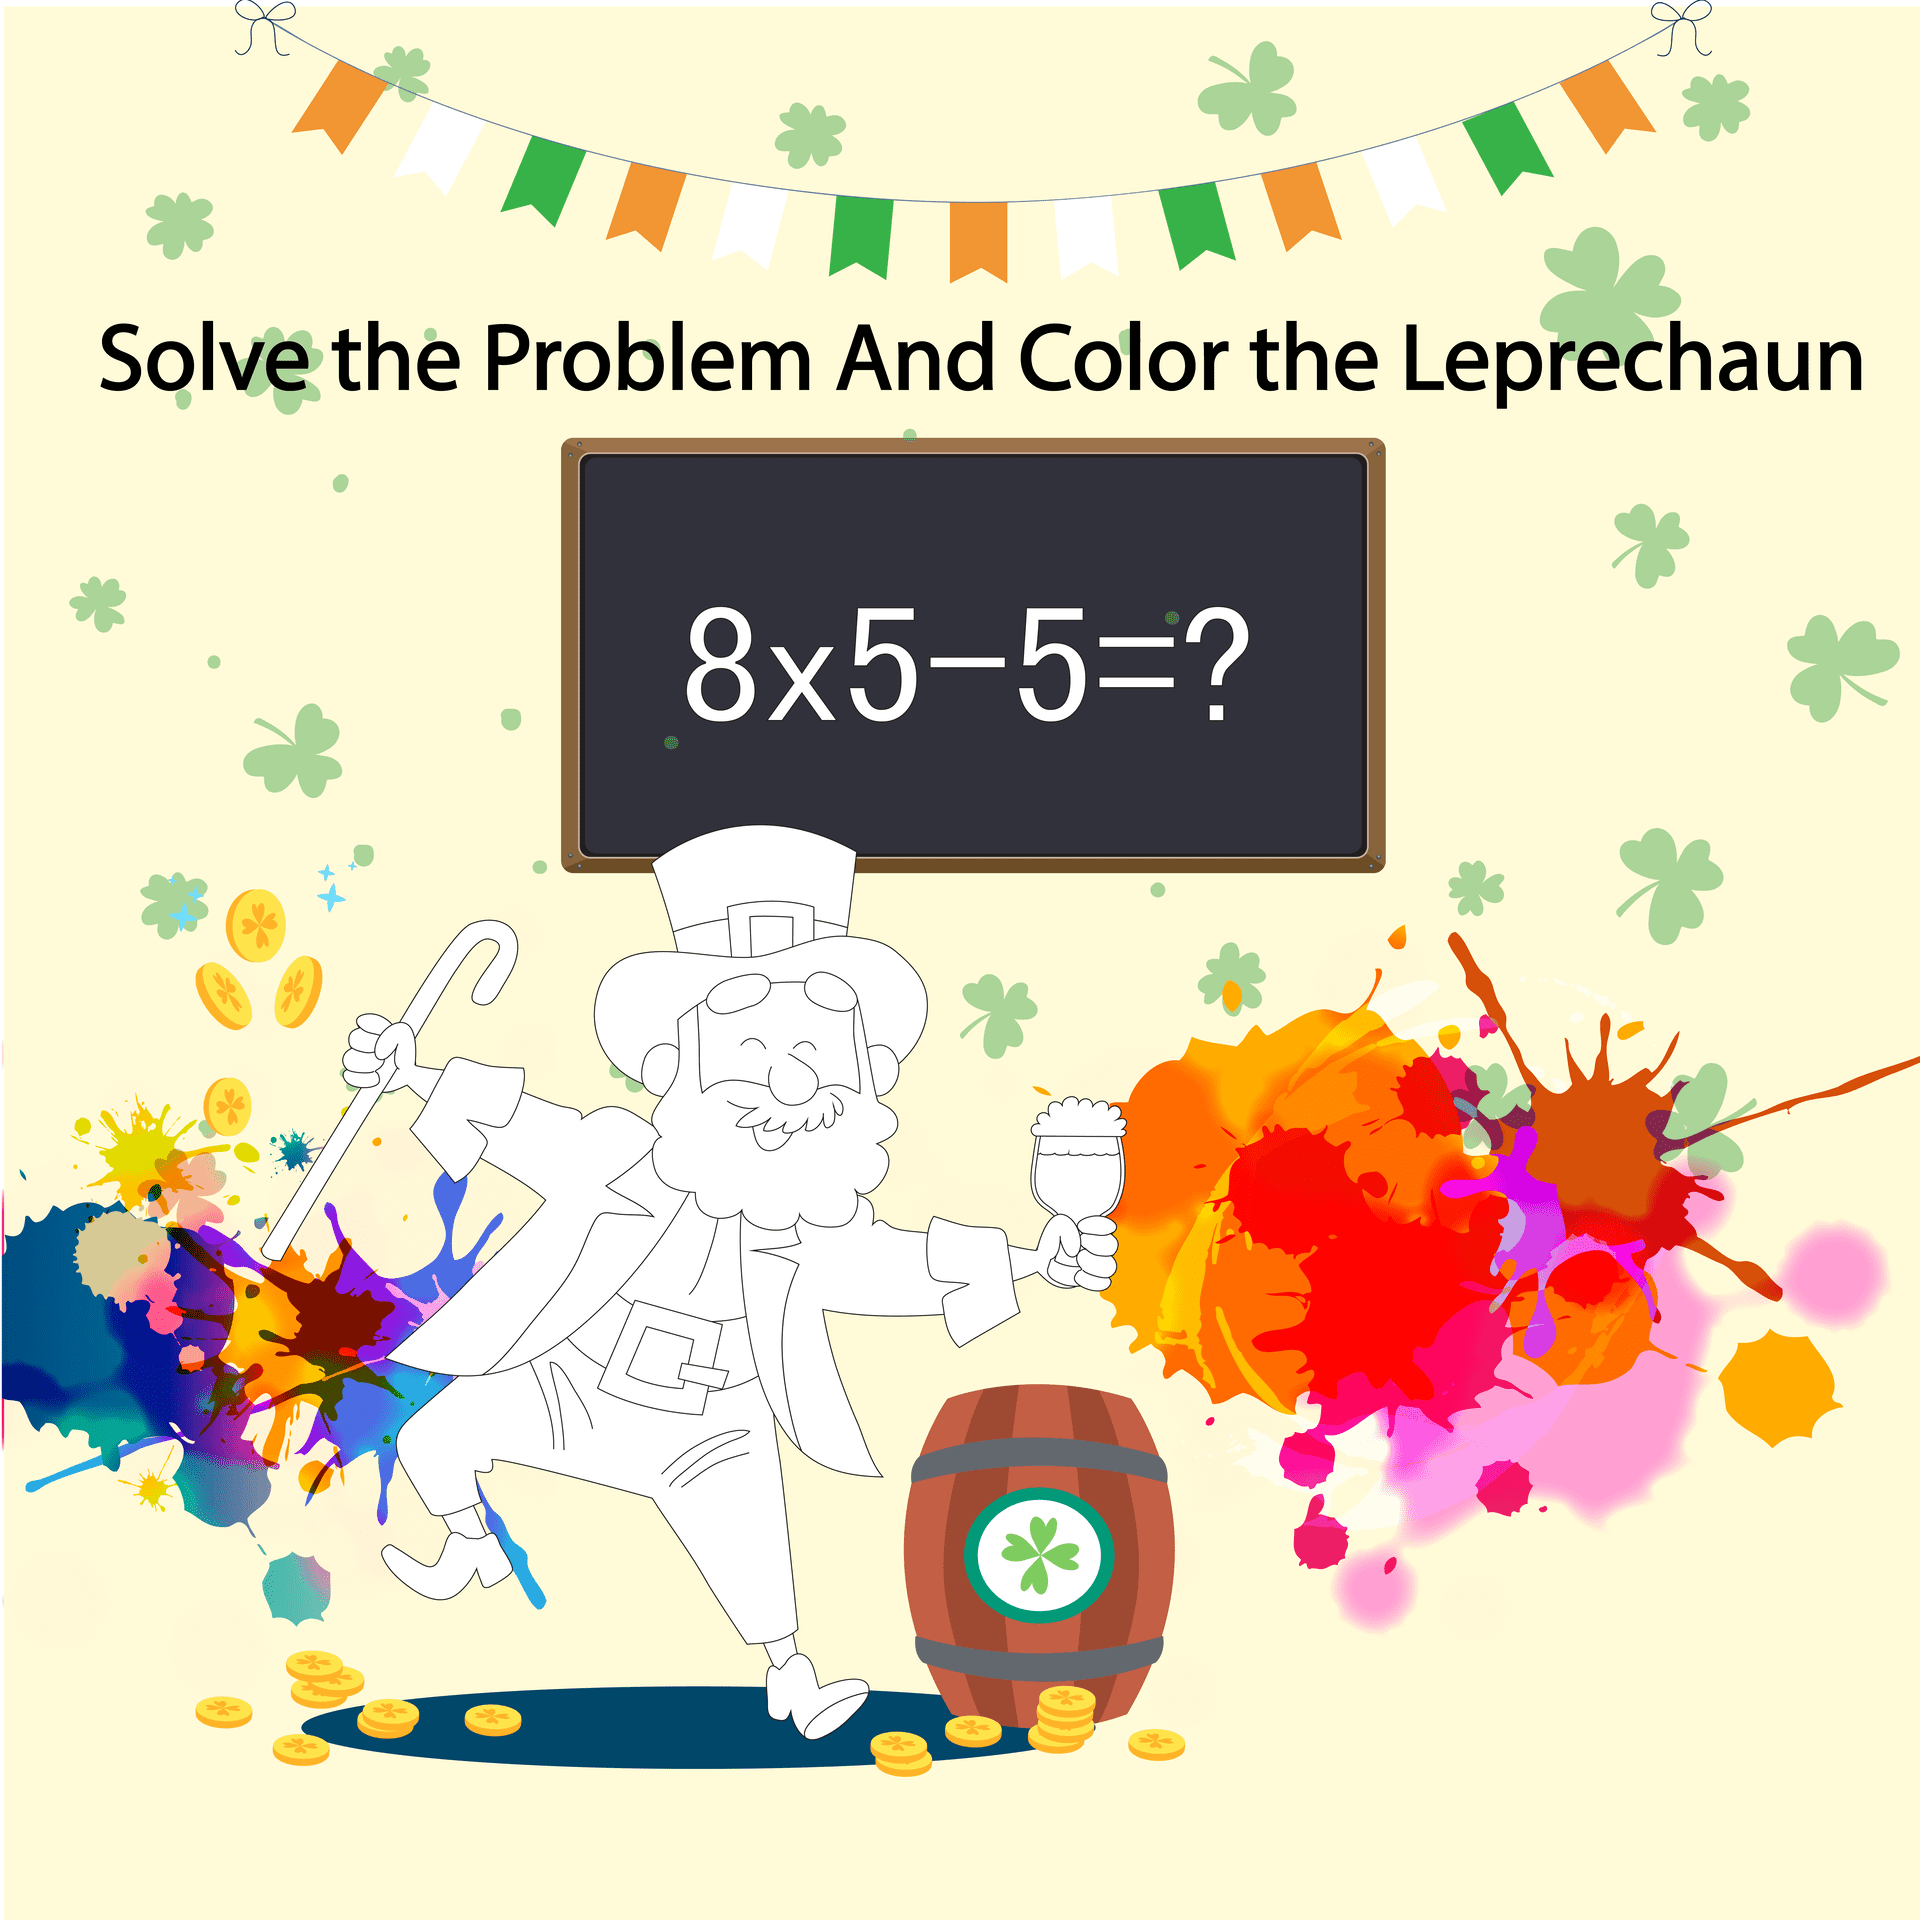 Add, Subtract, Multiply and Color the leprechaun